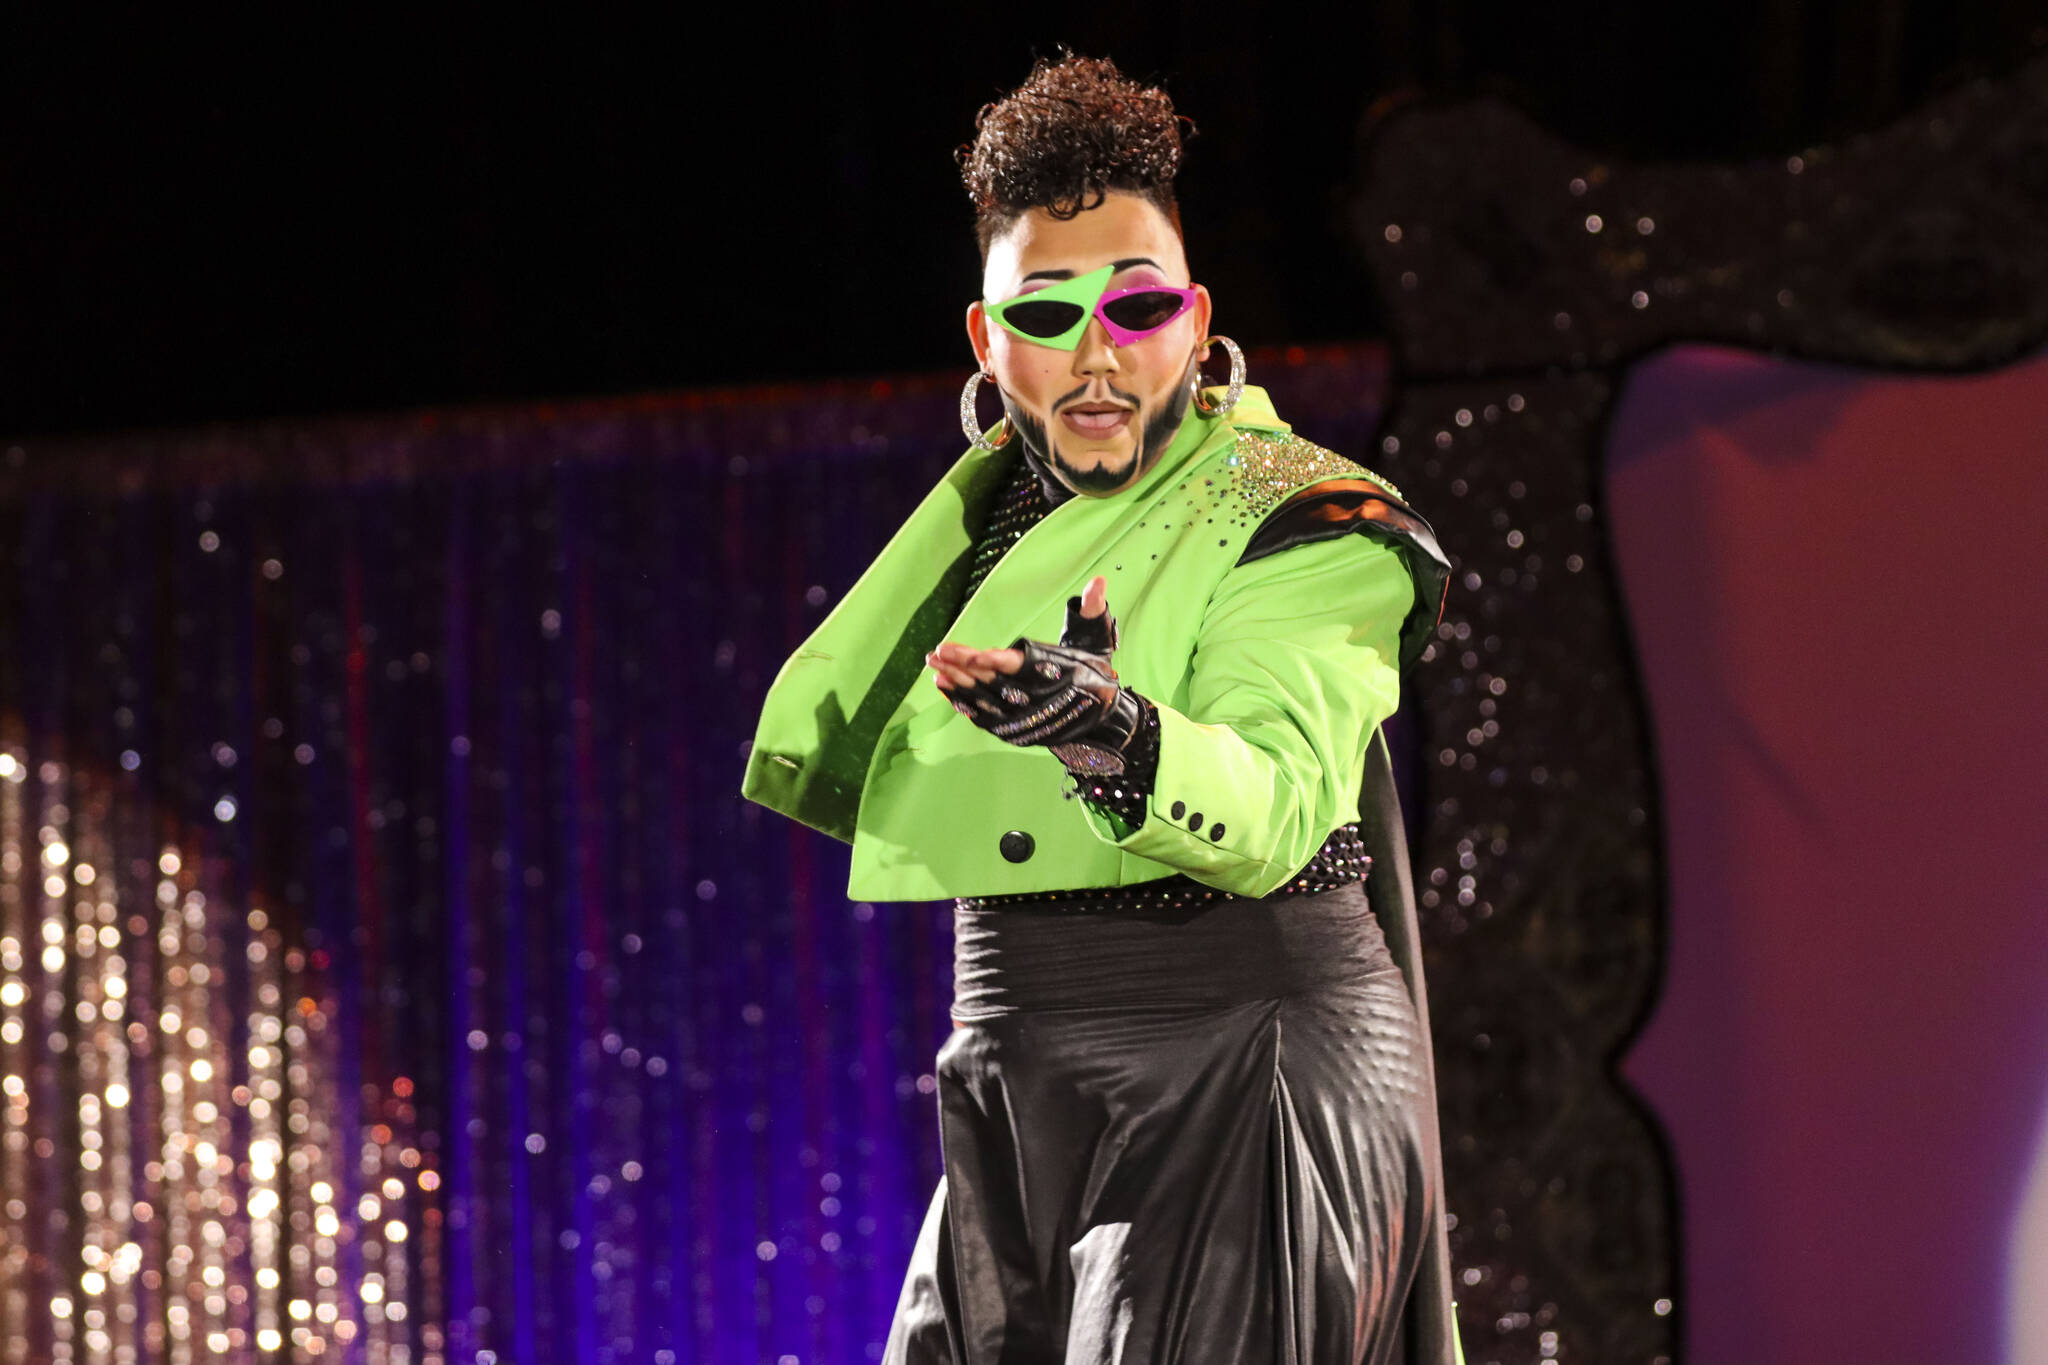 Tenderoni, one of the headliners, performs at at Glitz, a major annual drag event celebrated every Pride Month, at Centennial Hall on June 18, 2022. (Michael S. Lockett / Juneau Empire)